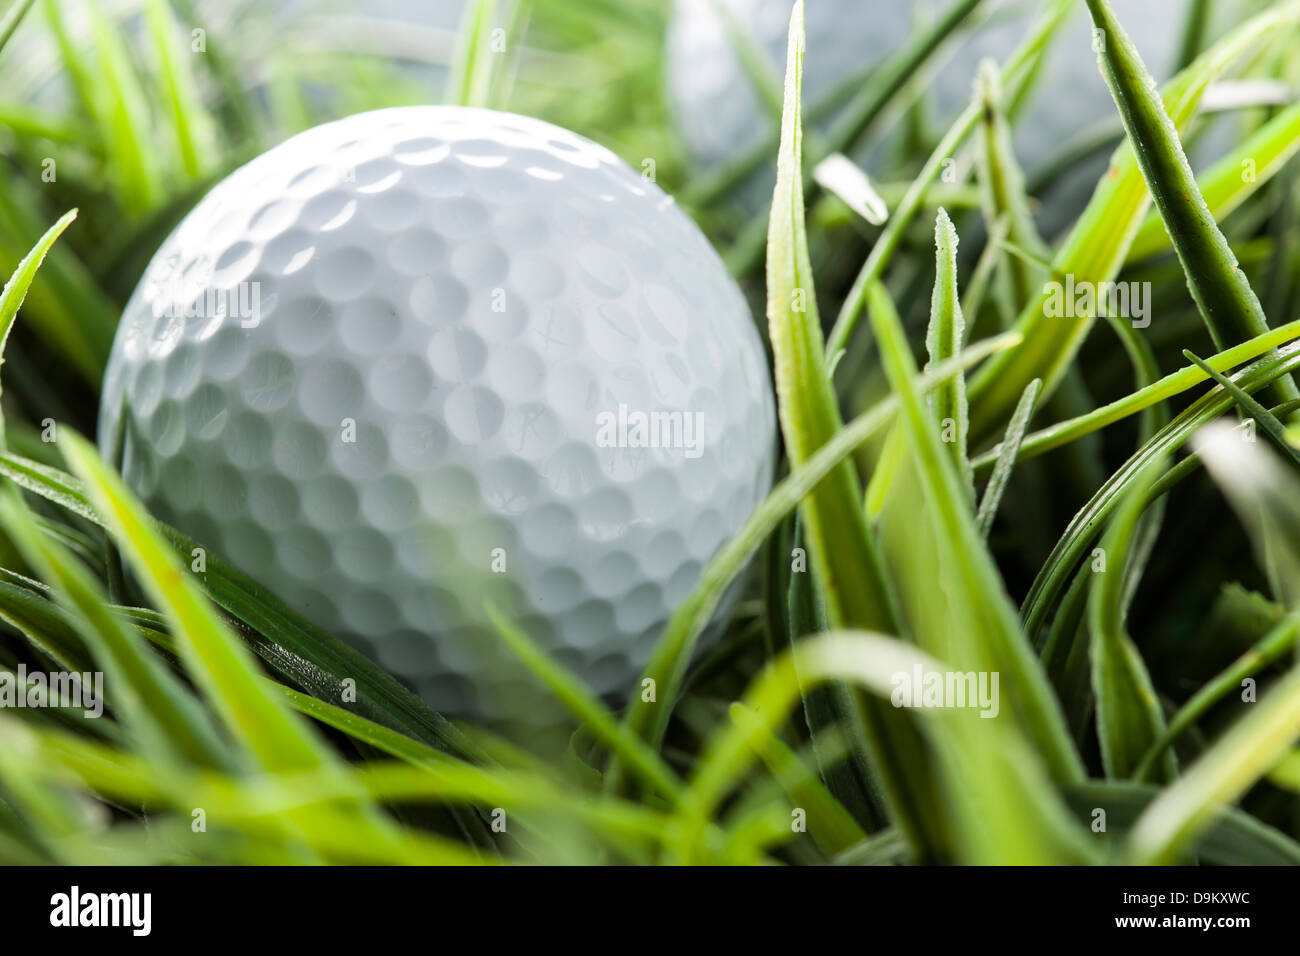 Pure White Golfball on bright green grass Stock Photo